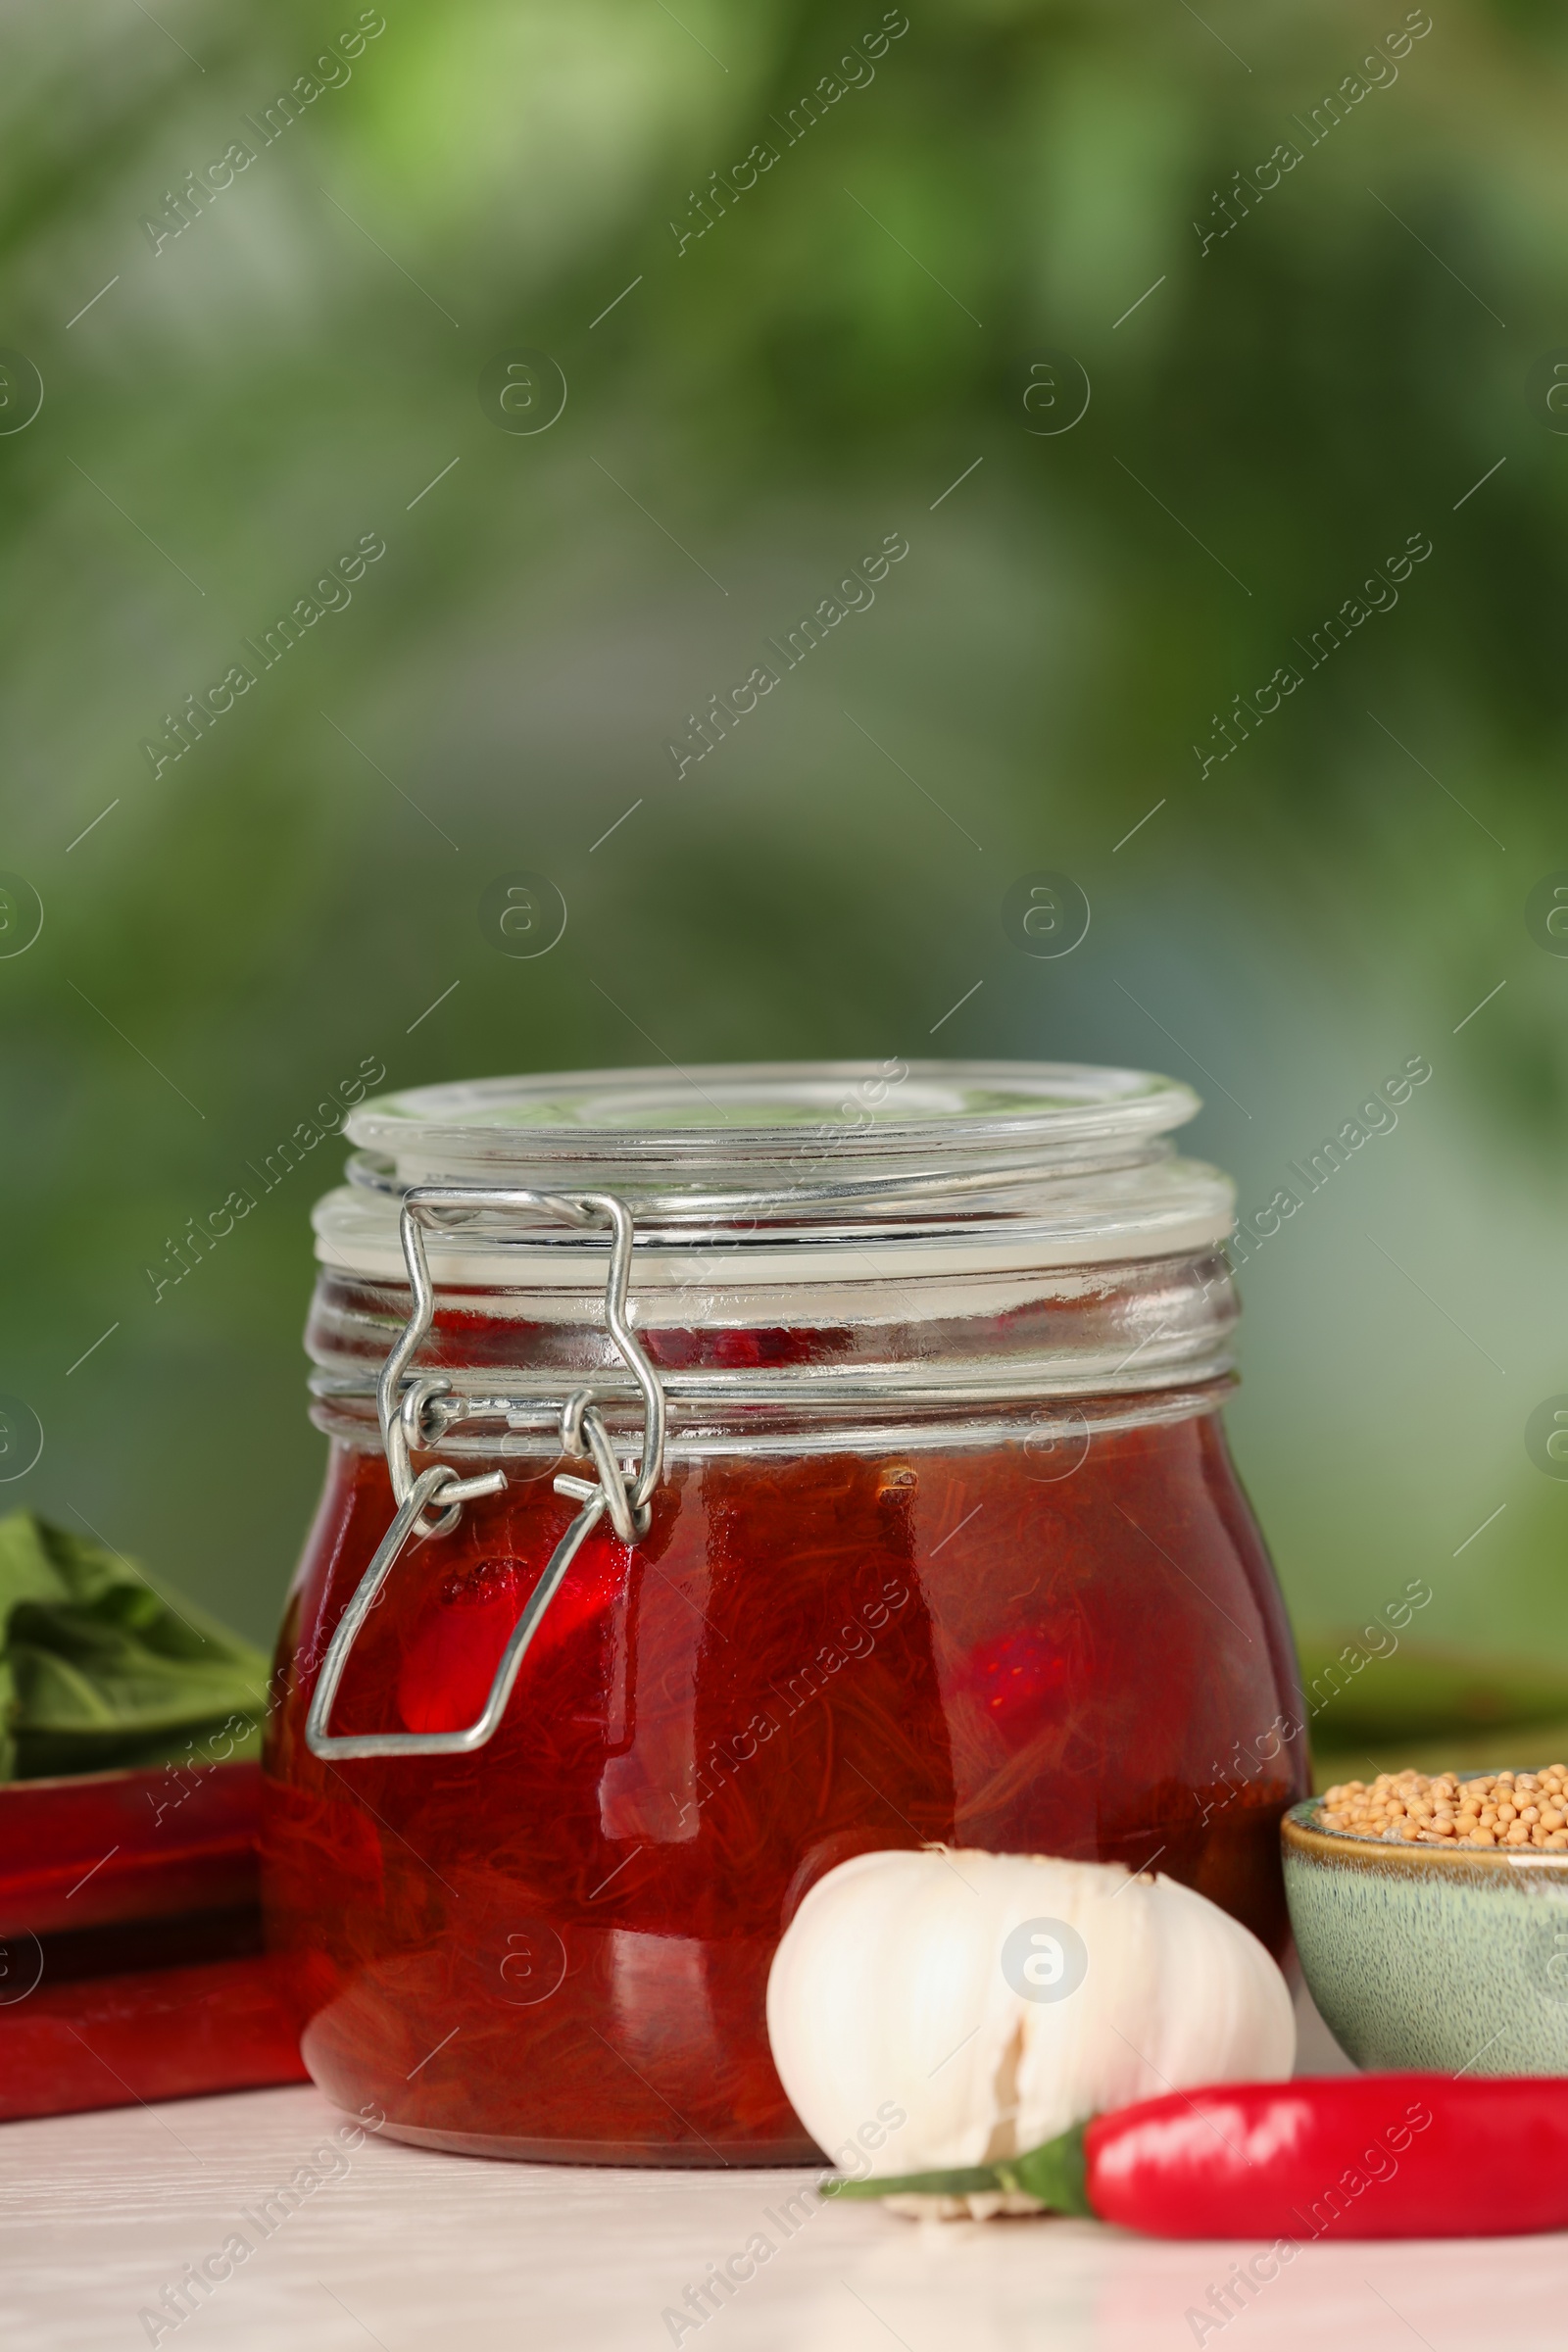 Photo of Tasty rhubarb sauce and ingredients on white table against blurred background, space for text